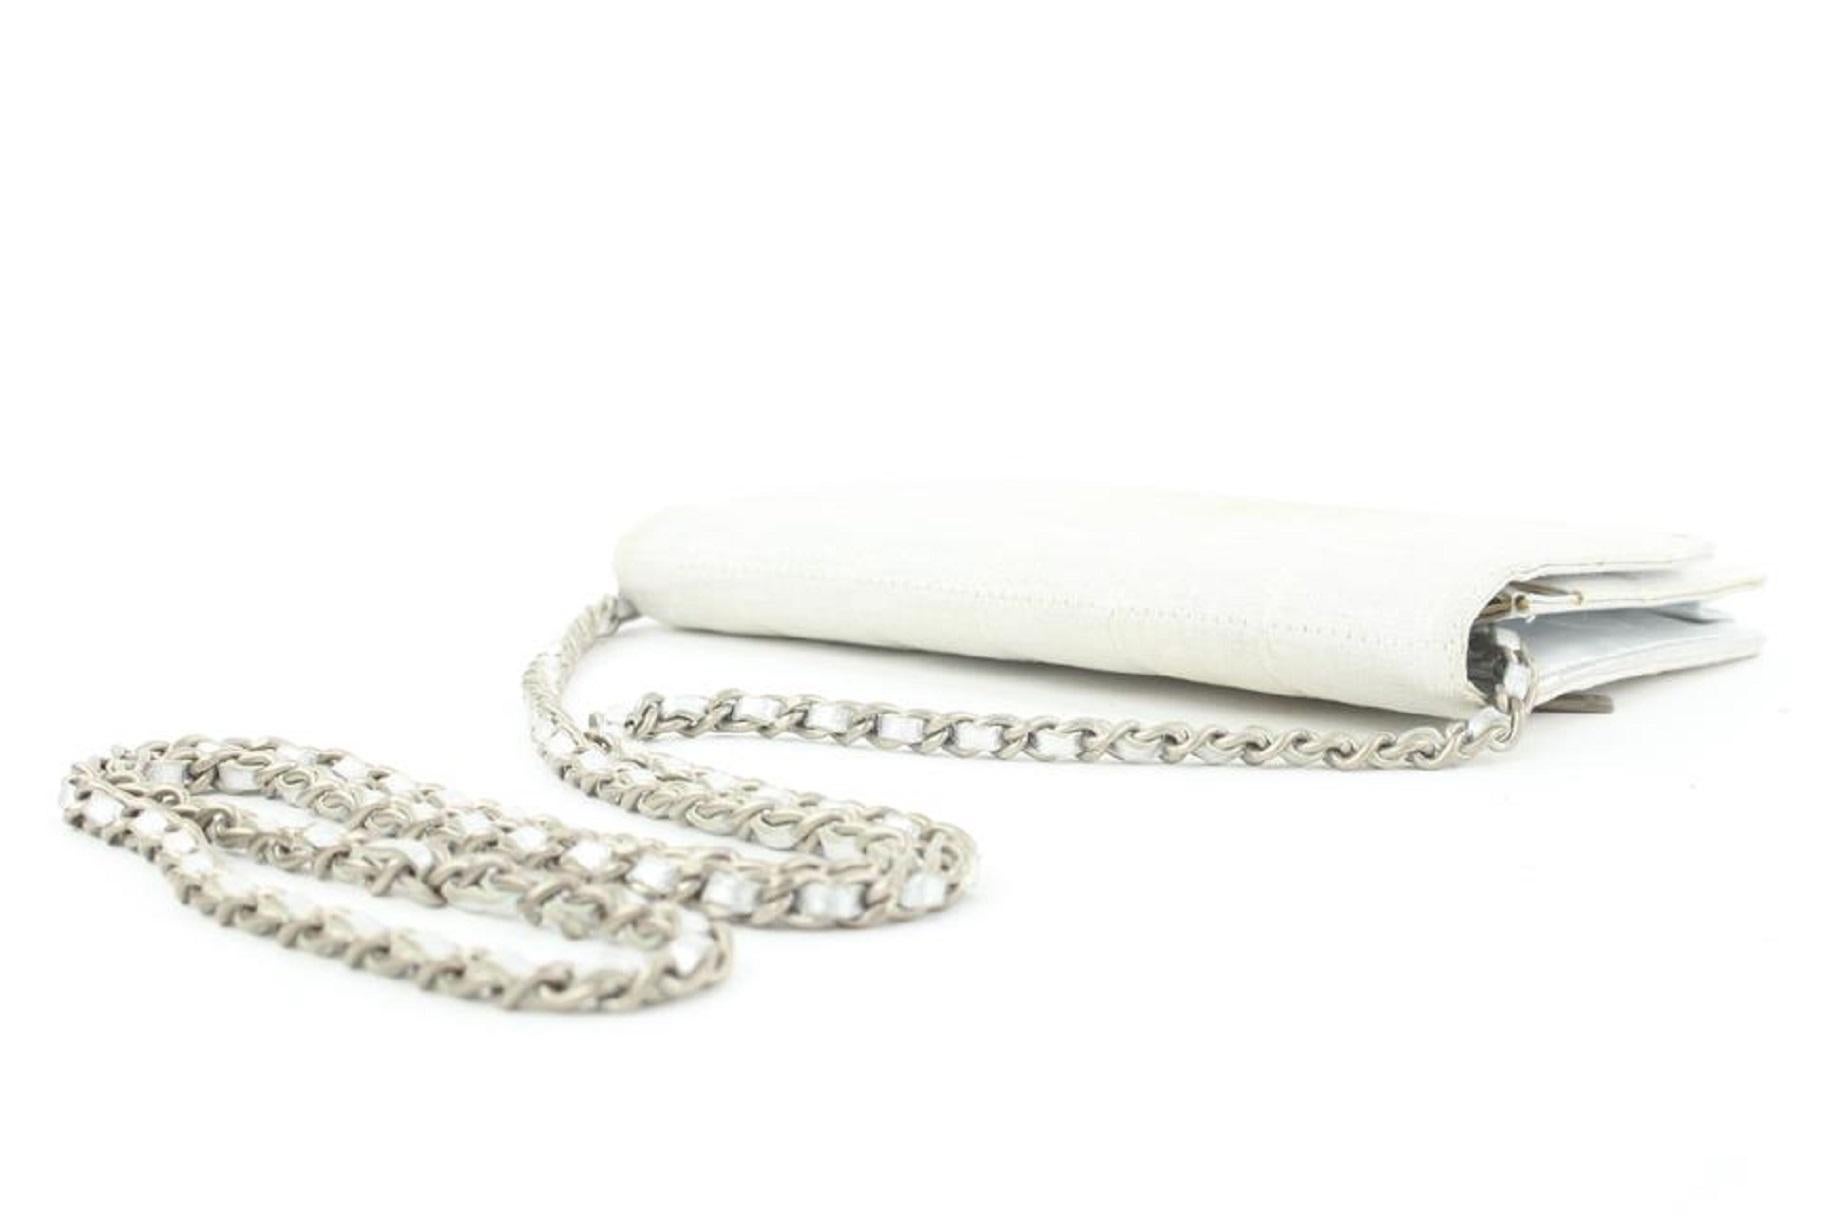 Chanel Silver New Line Wallet on Chain Bag WOC 2ccs114 For Sale 1